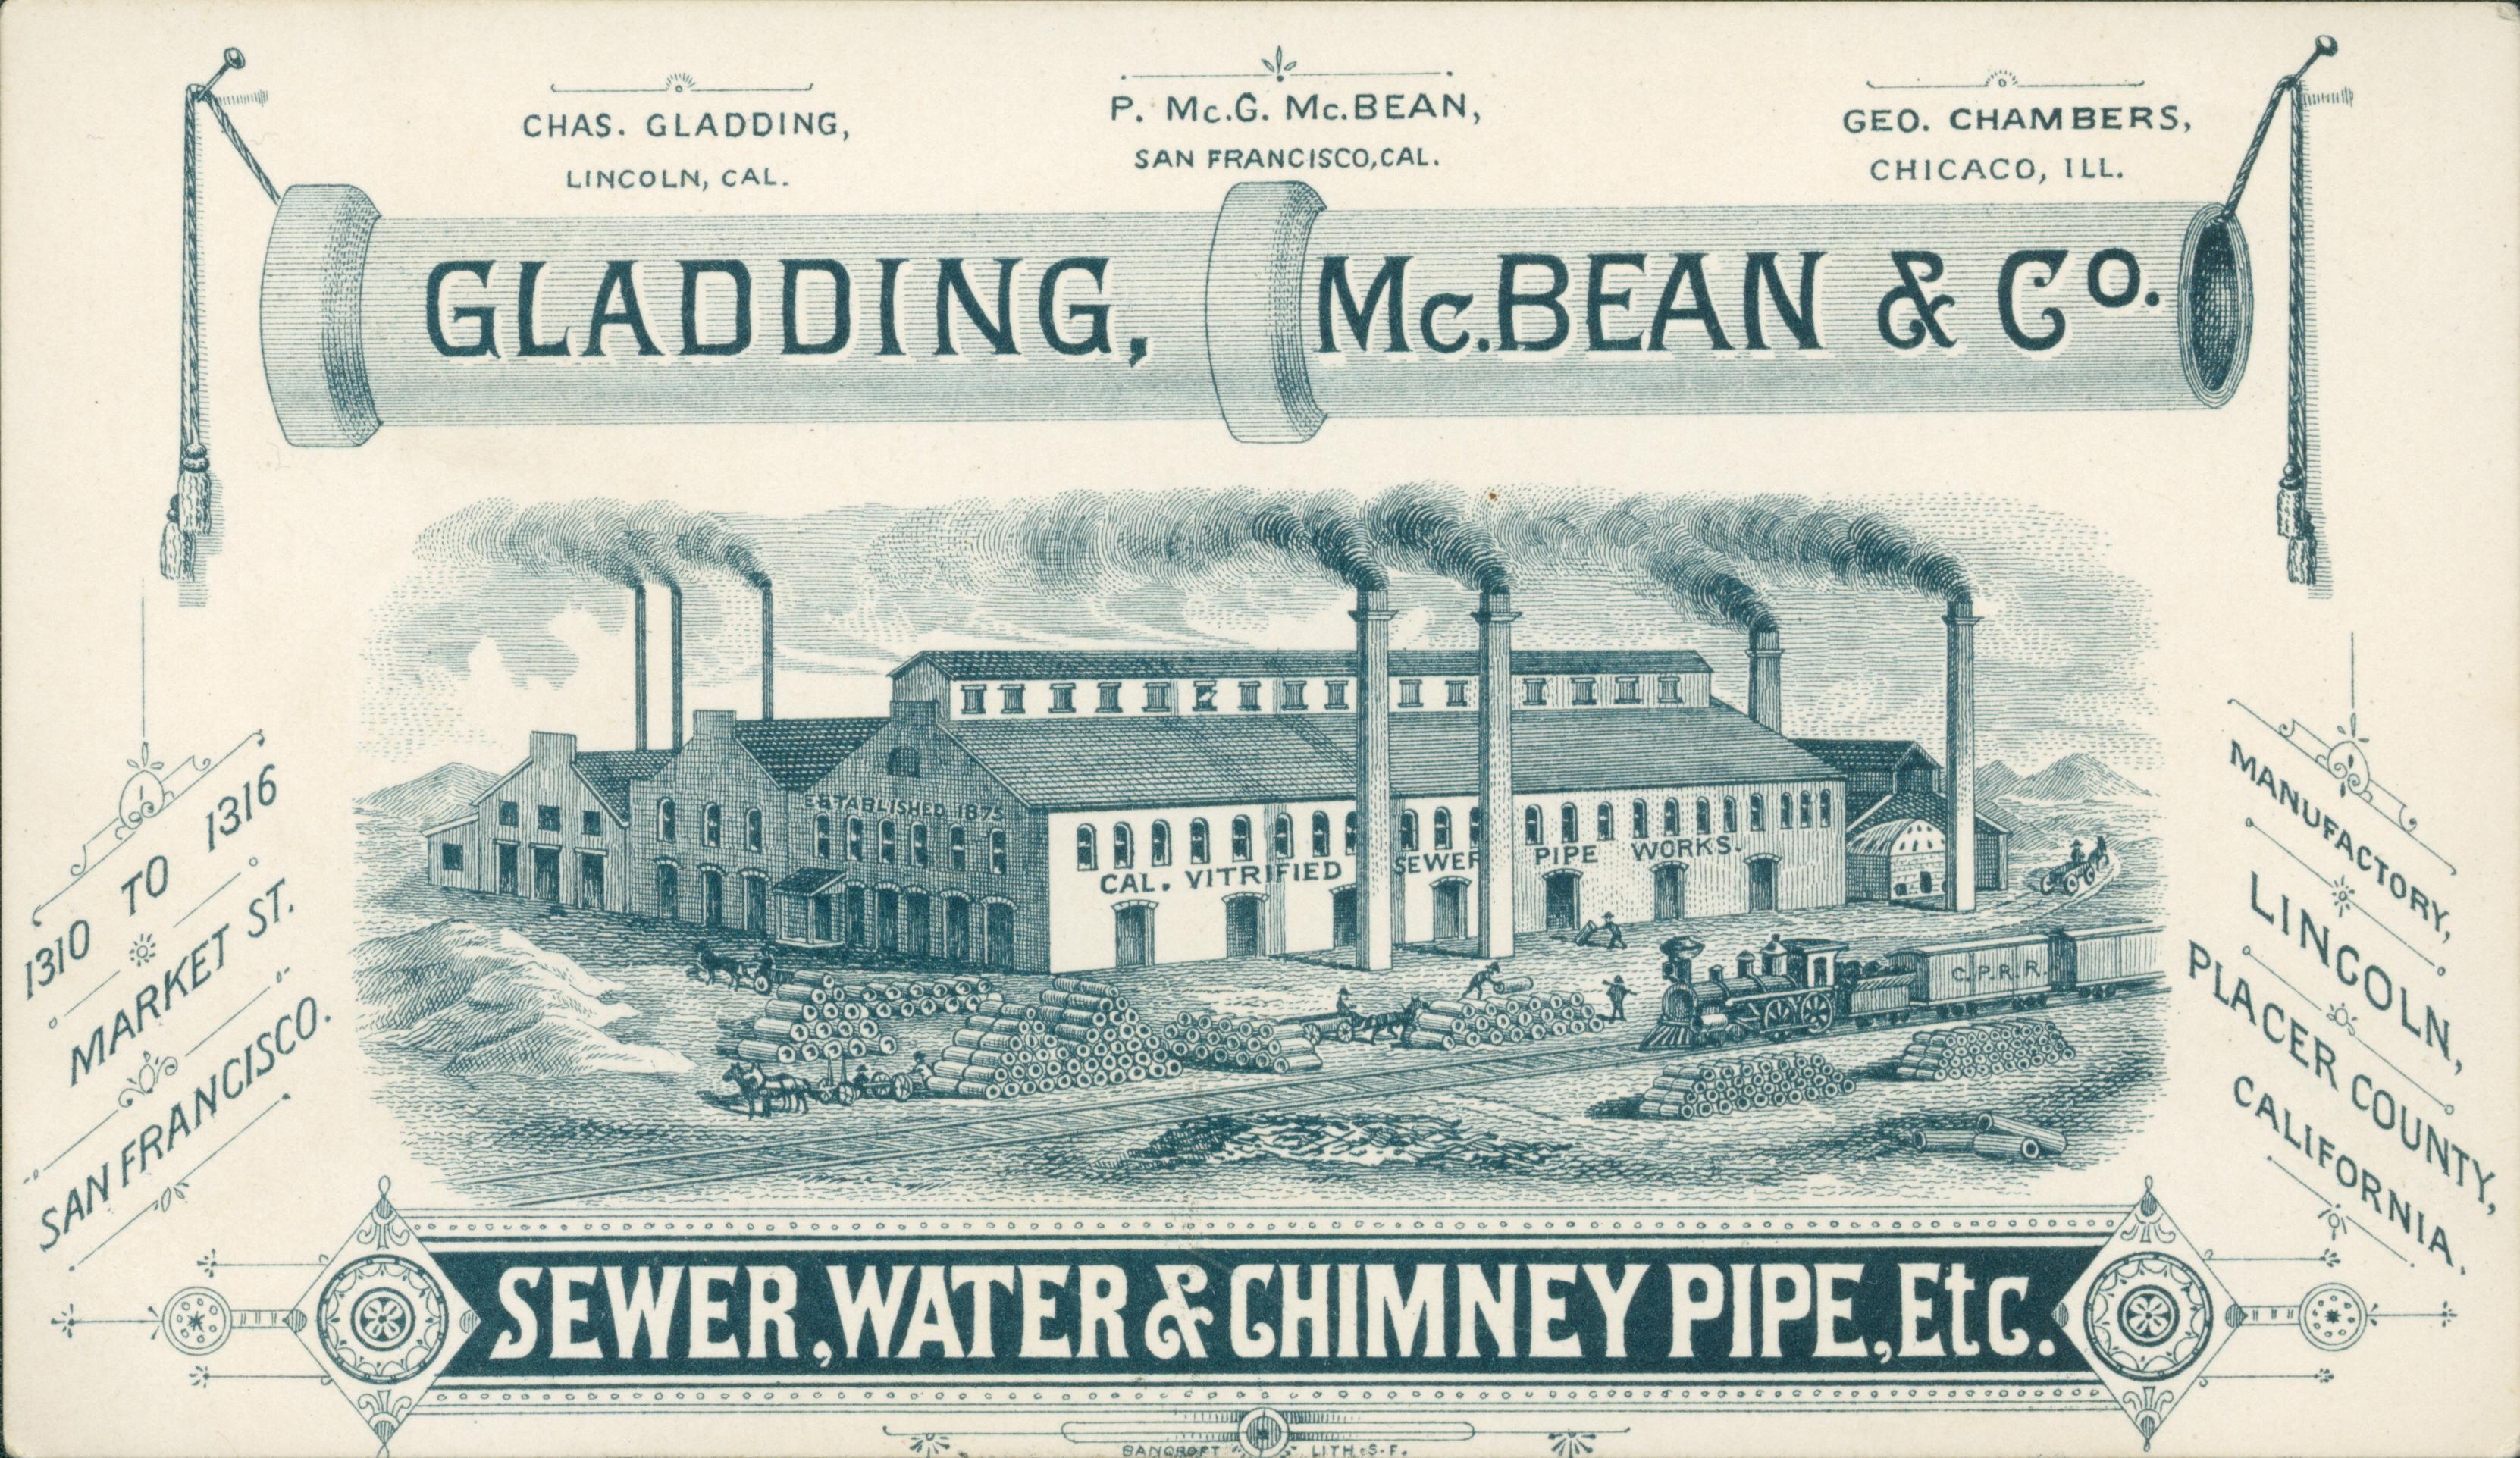 This trade card shows an engraving of the Gladding McBean plant in operation, with details about their locations framing the image.